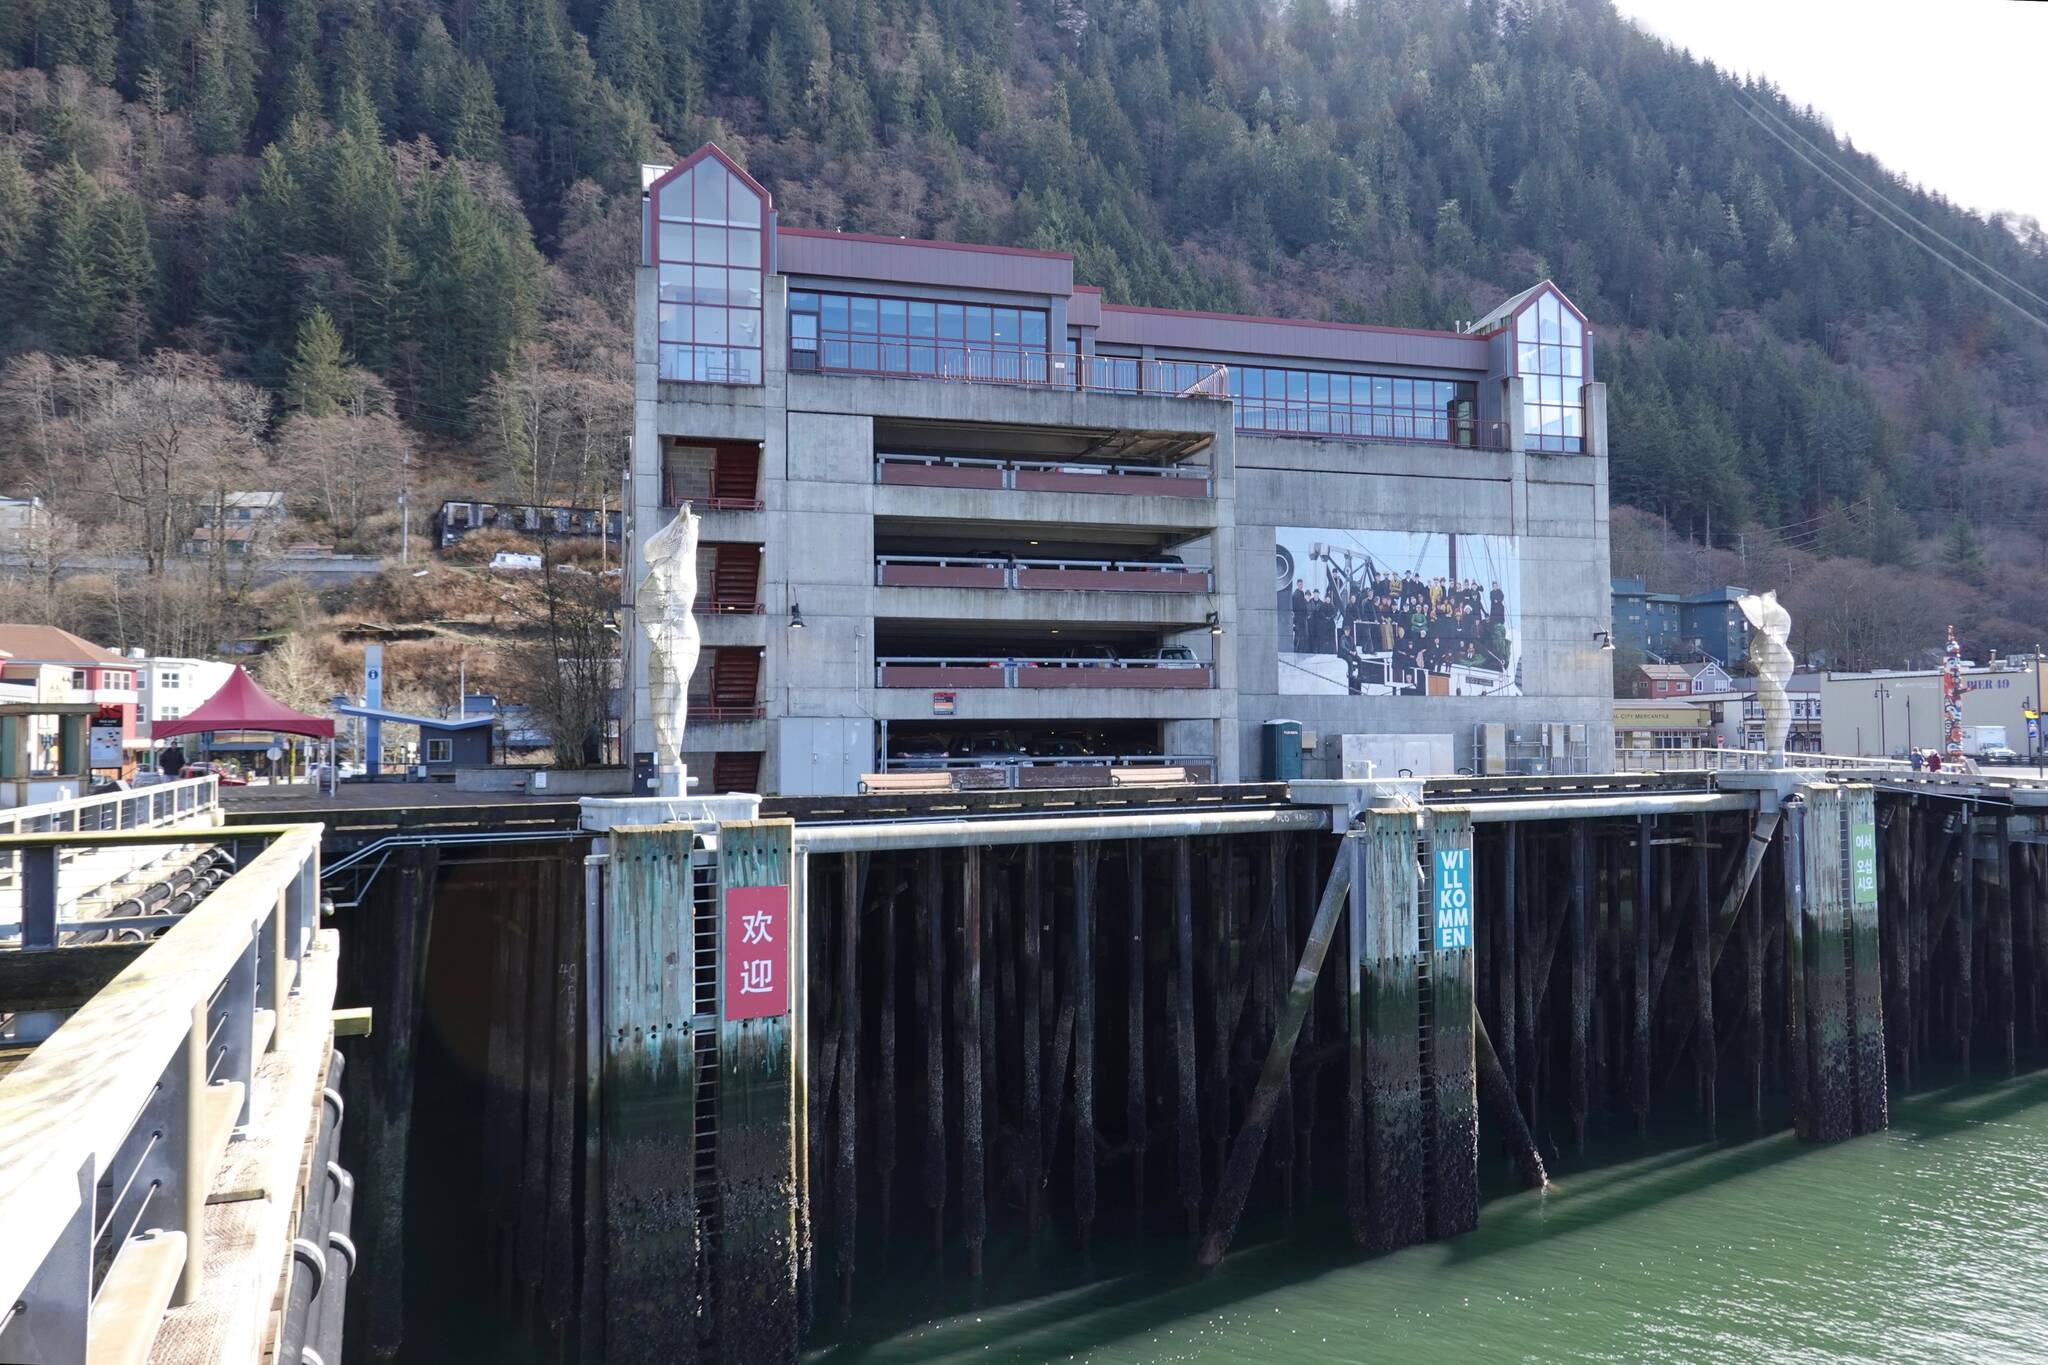 A waterfront view of Marine Parking Garage with the windows of the Juneau Public Library visible on the top floor. “Welcome” signs in several languages greet ships on the dock pilings below. (Laurie Craig / For the Juneau Empire)